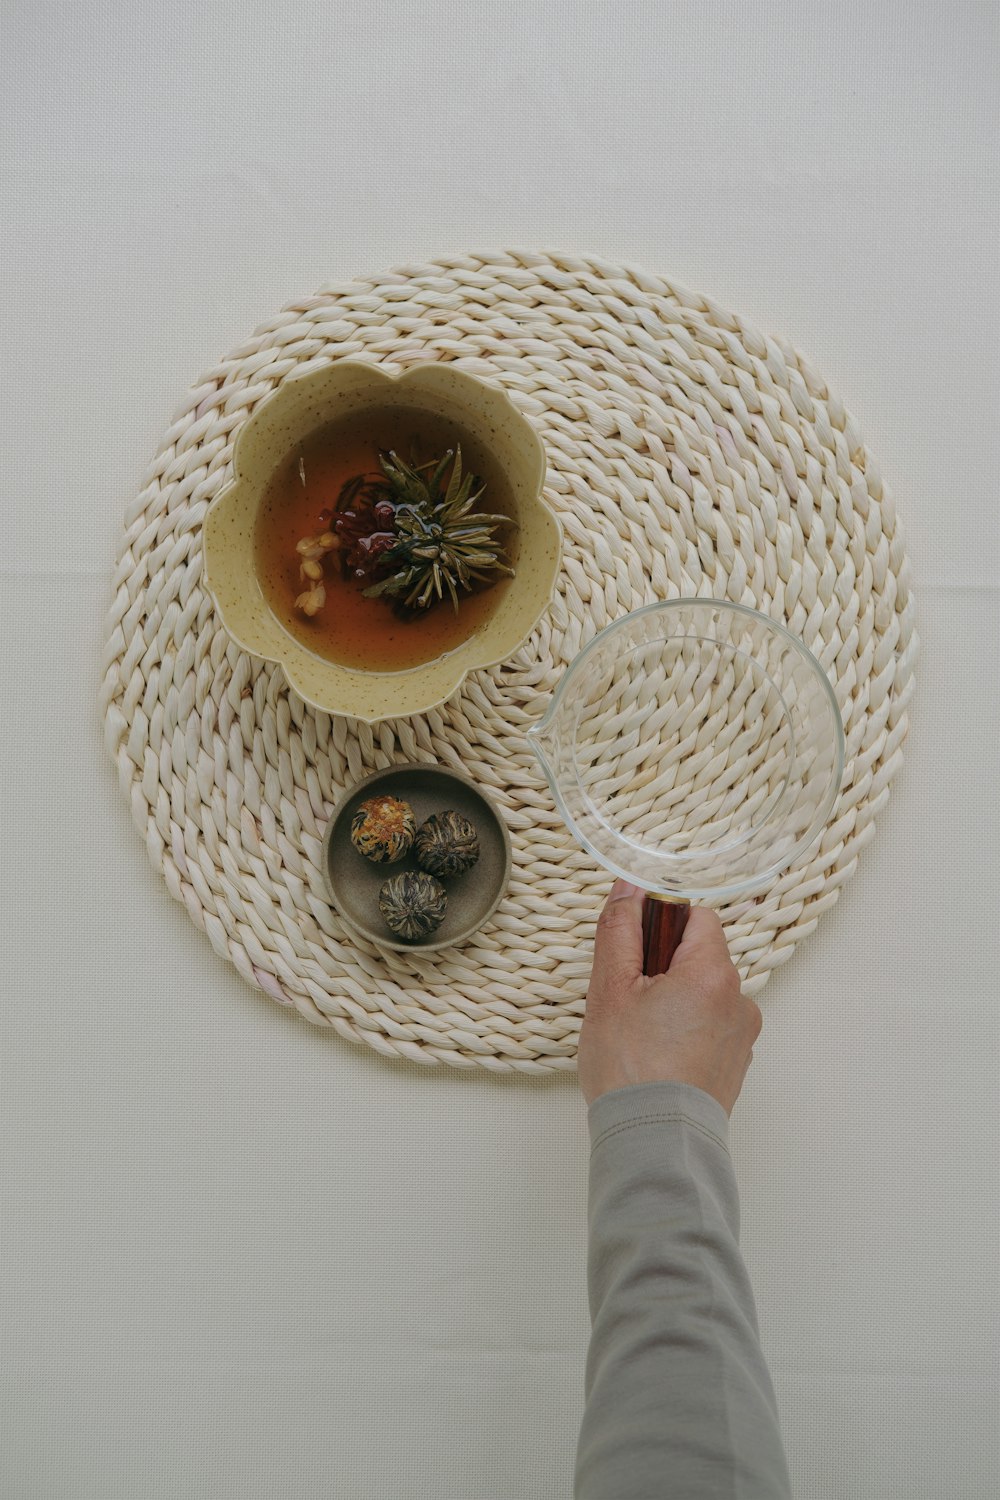 a person holding a wine glass in front of a bowl of soup